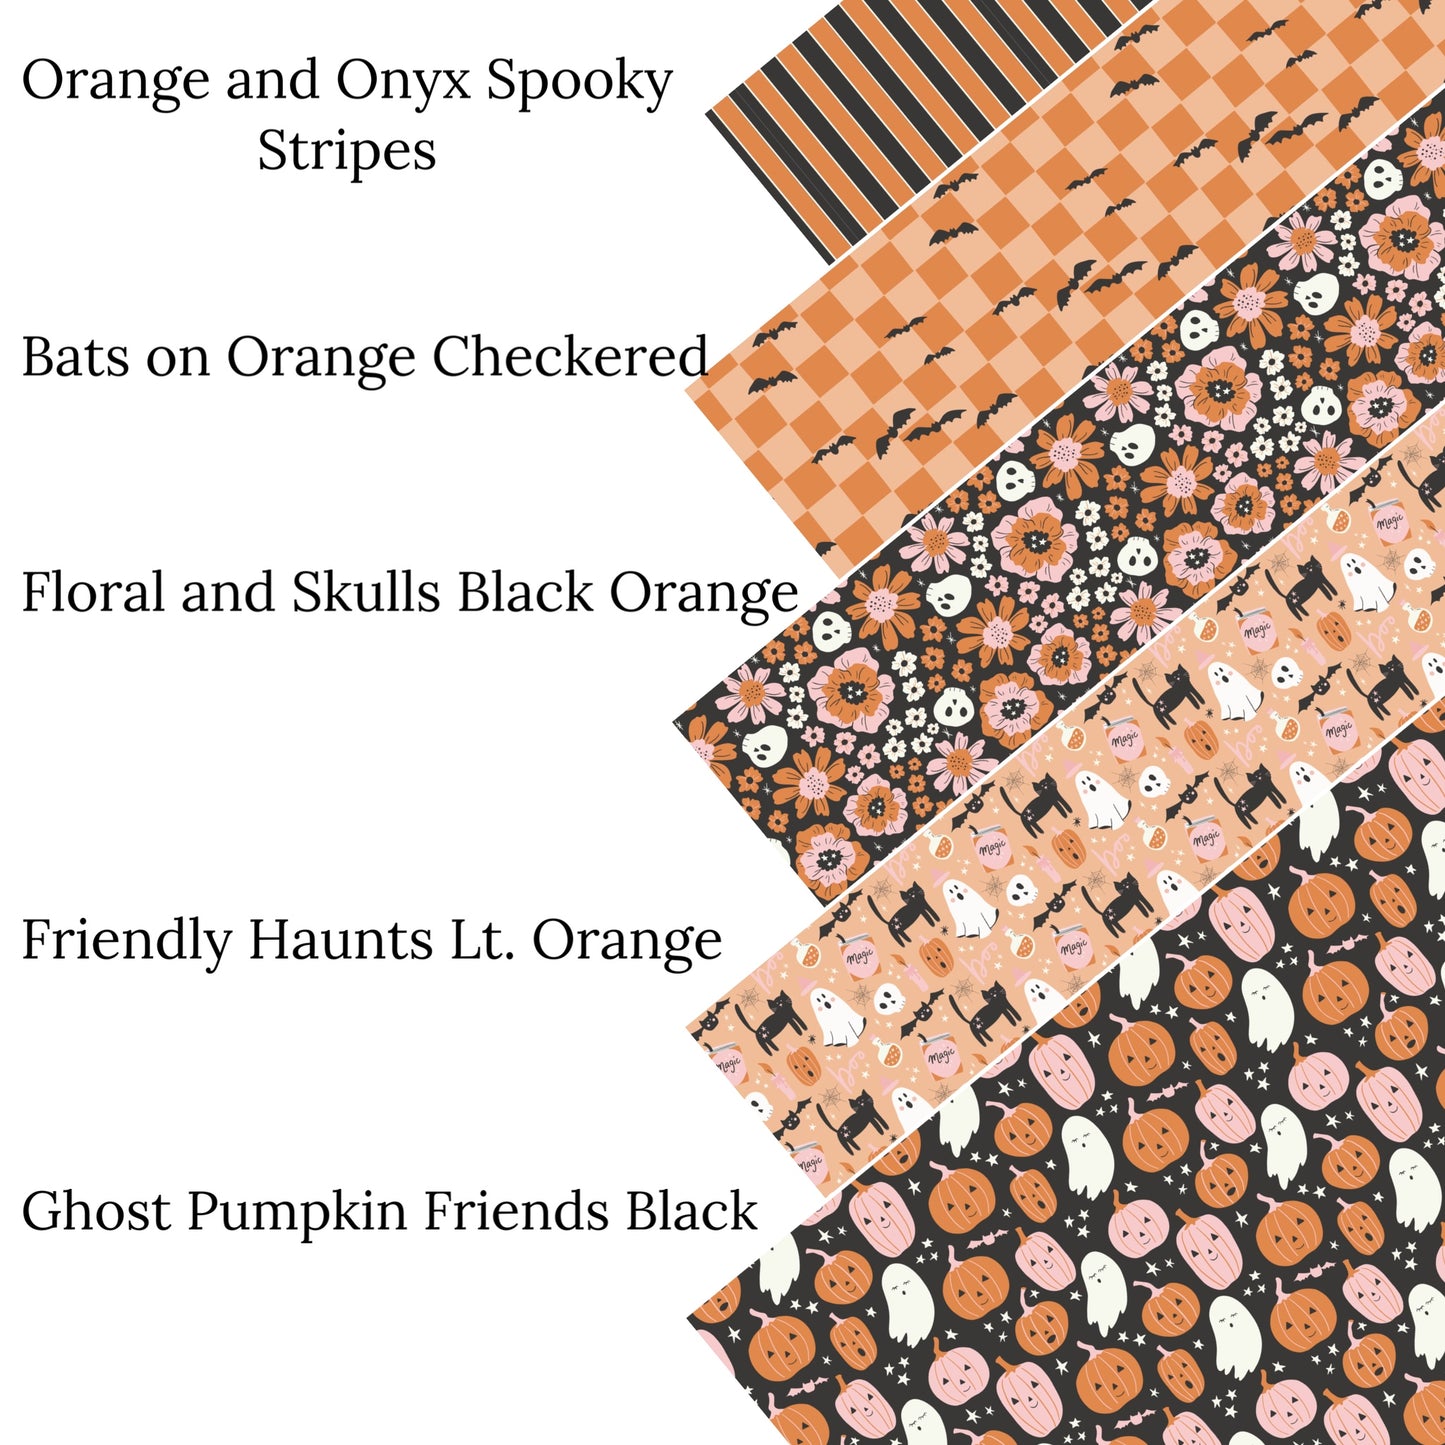 Bats on Orange Checkered Faux Leather Sheets